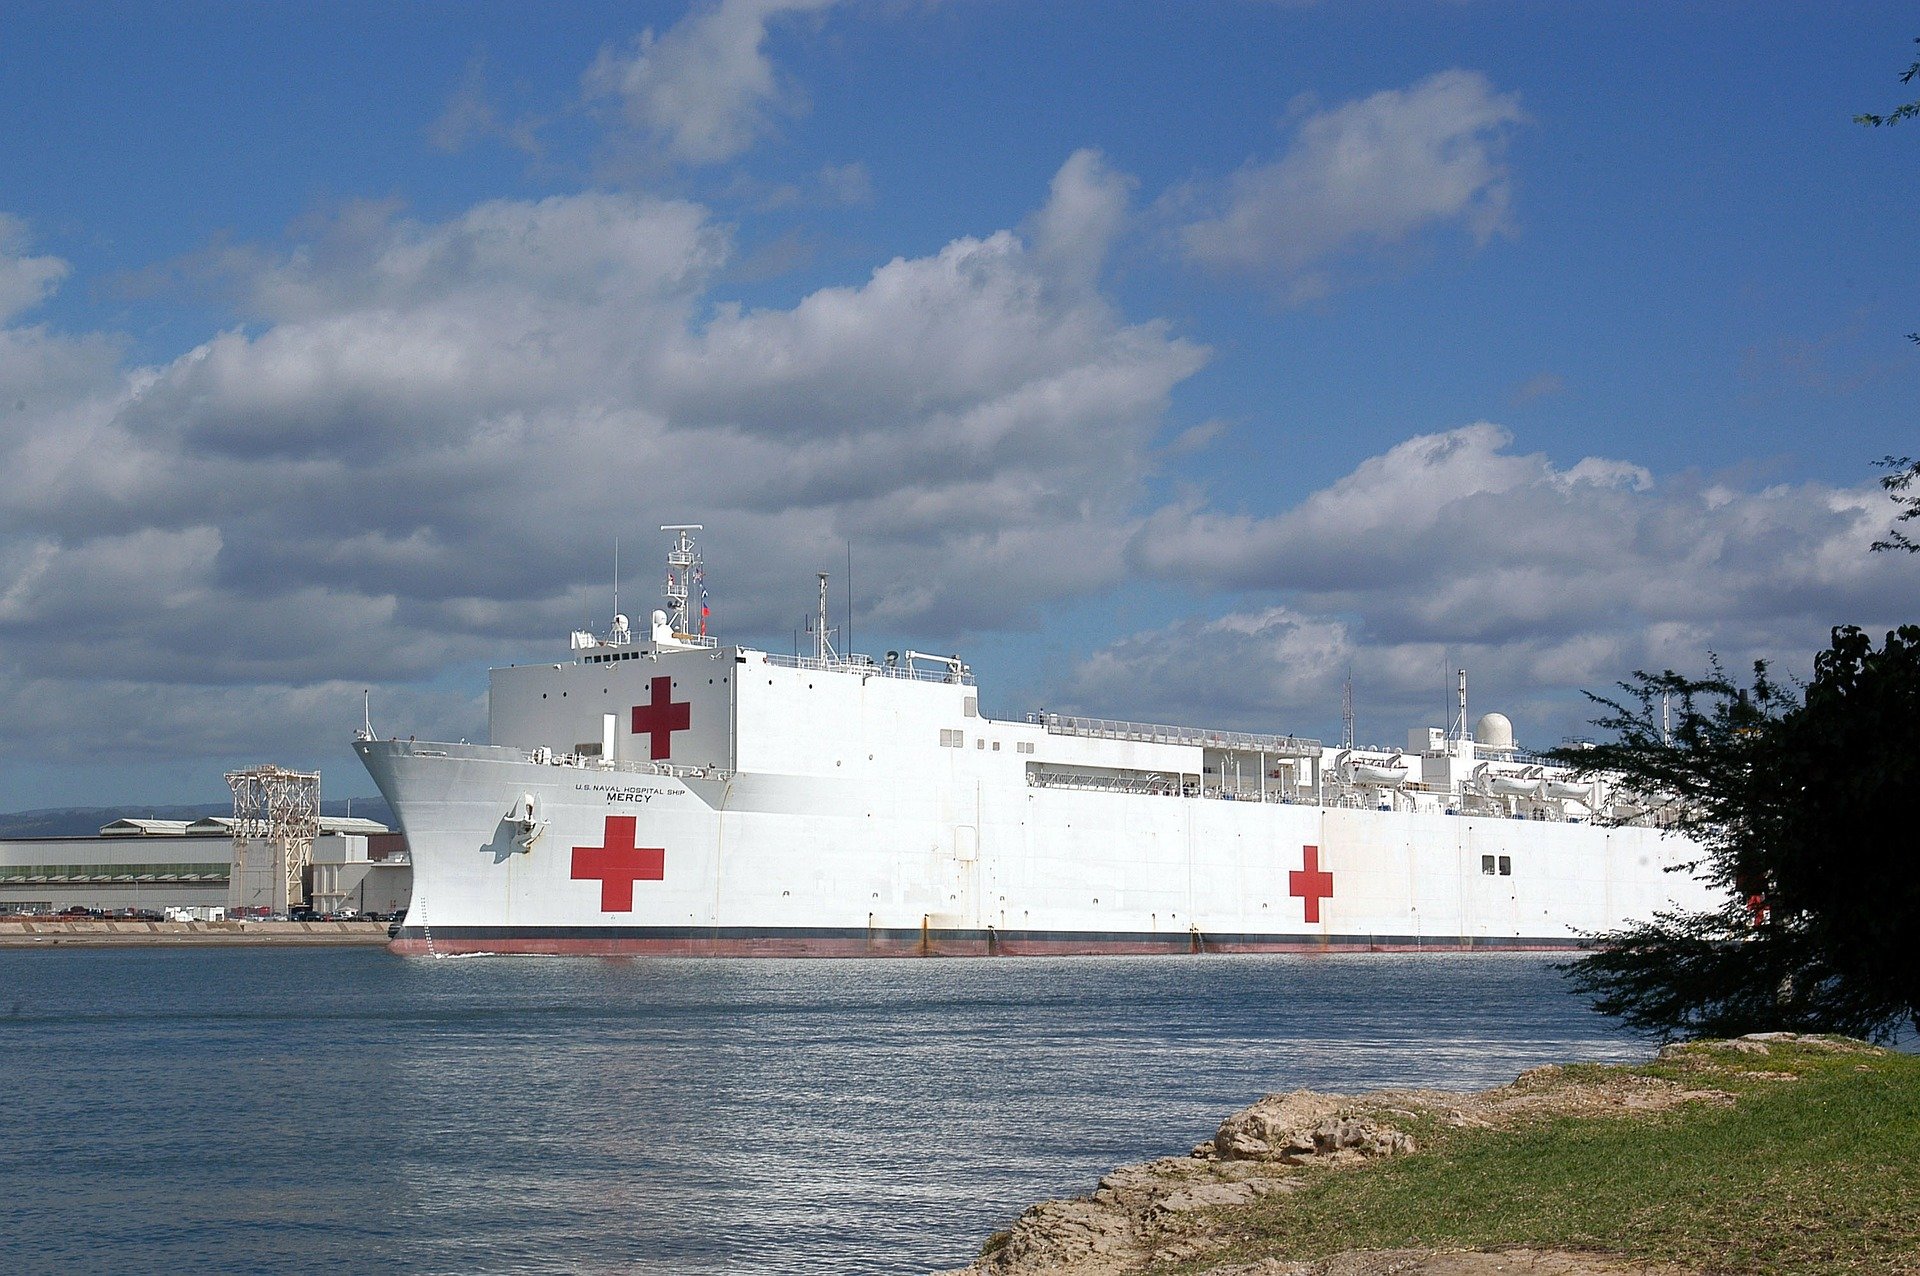 Loon Rachel Maddow: "Nonsense" US Navy Ship Will Be in NYC Soon - USNS "Comfort" Arrived in NY Harbor Monday Morning.